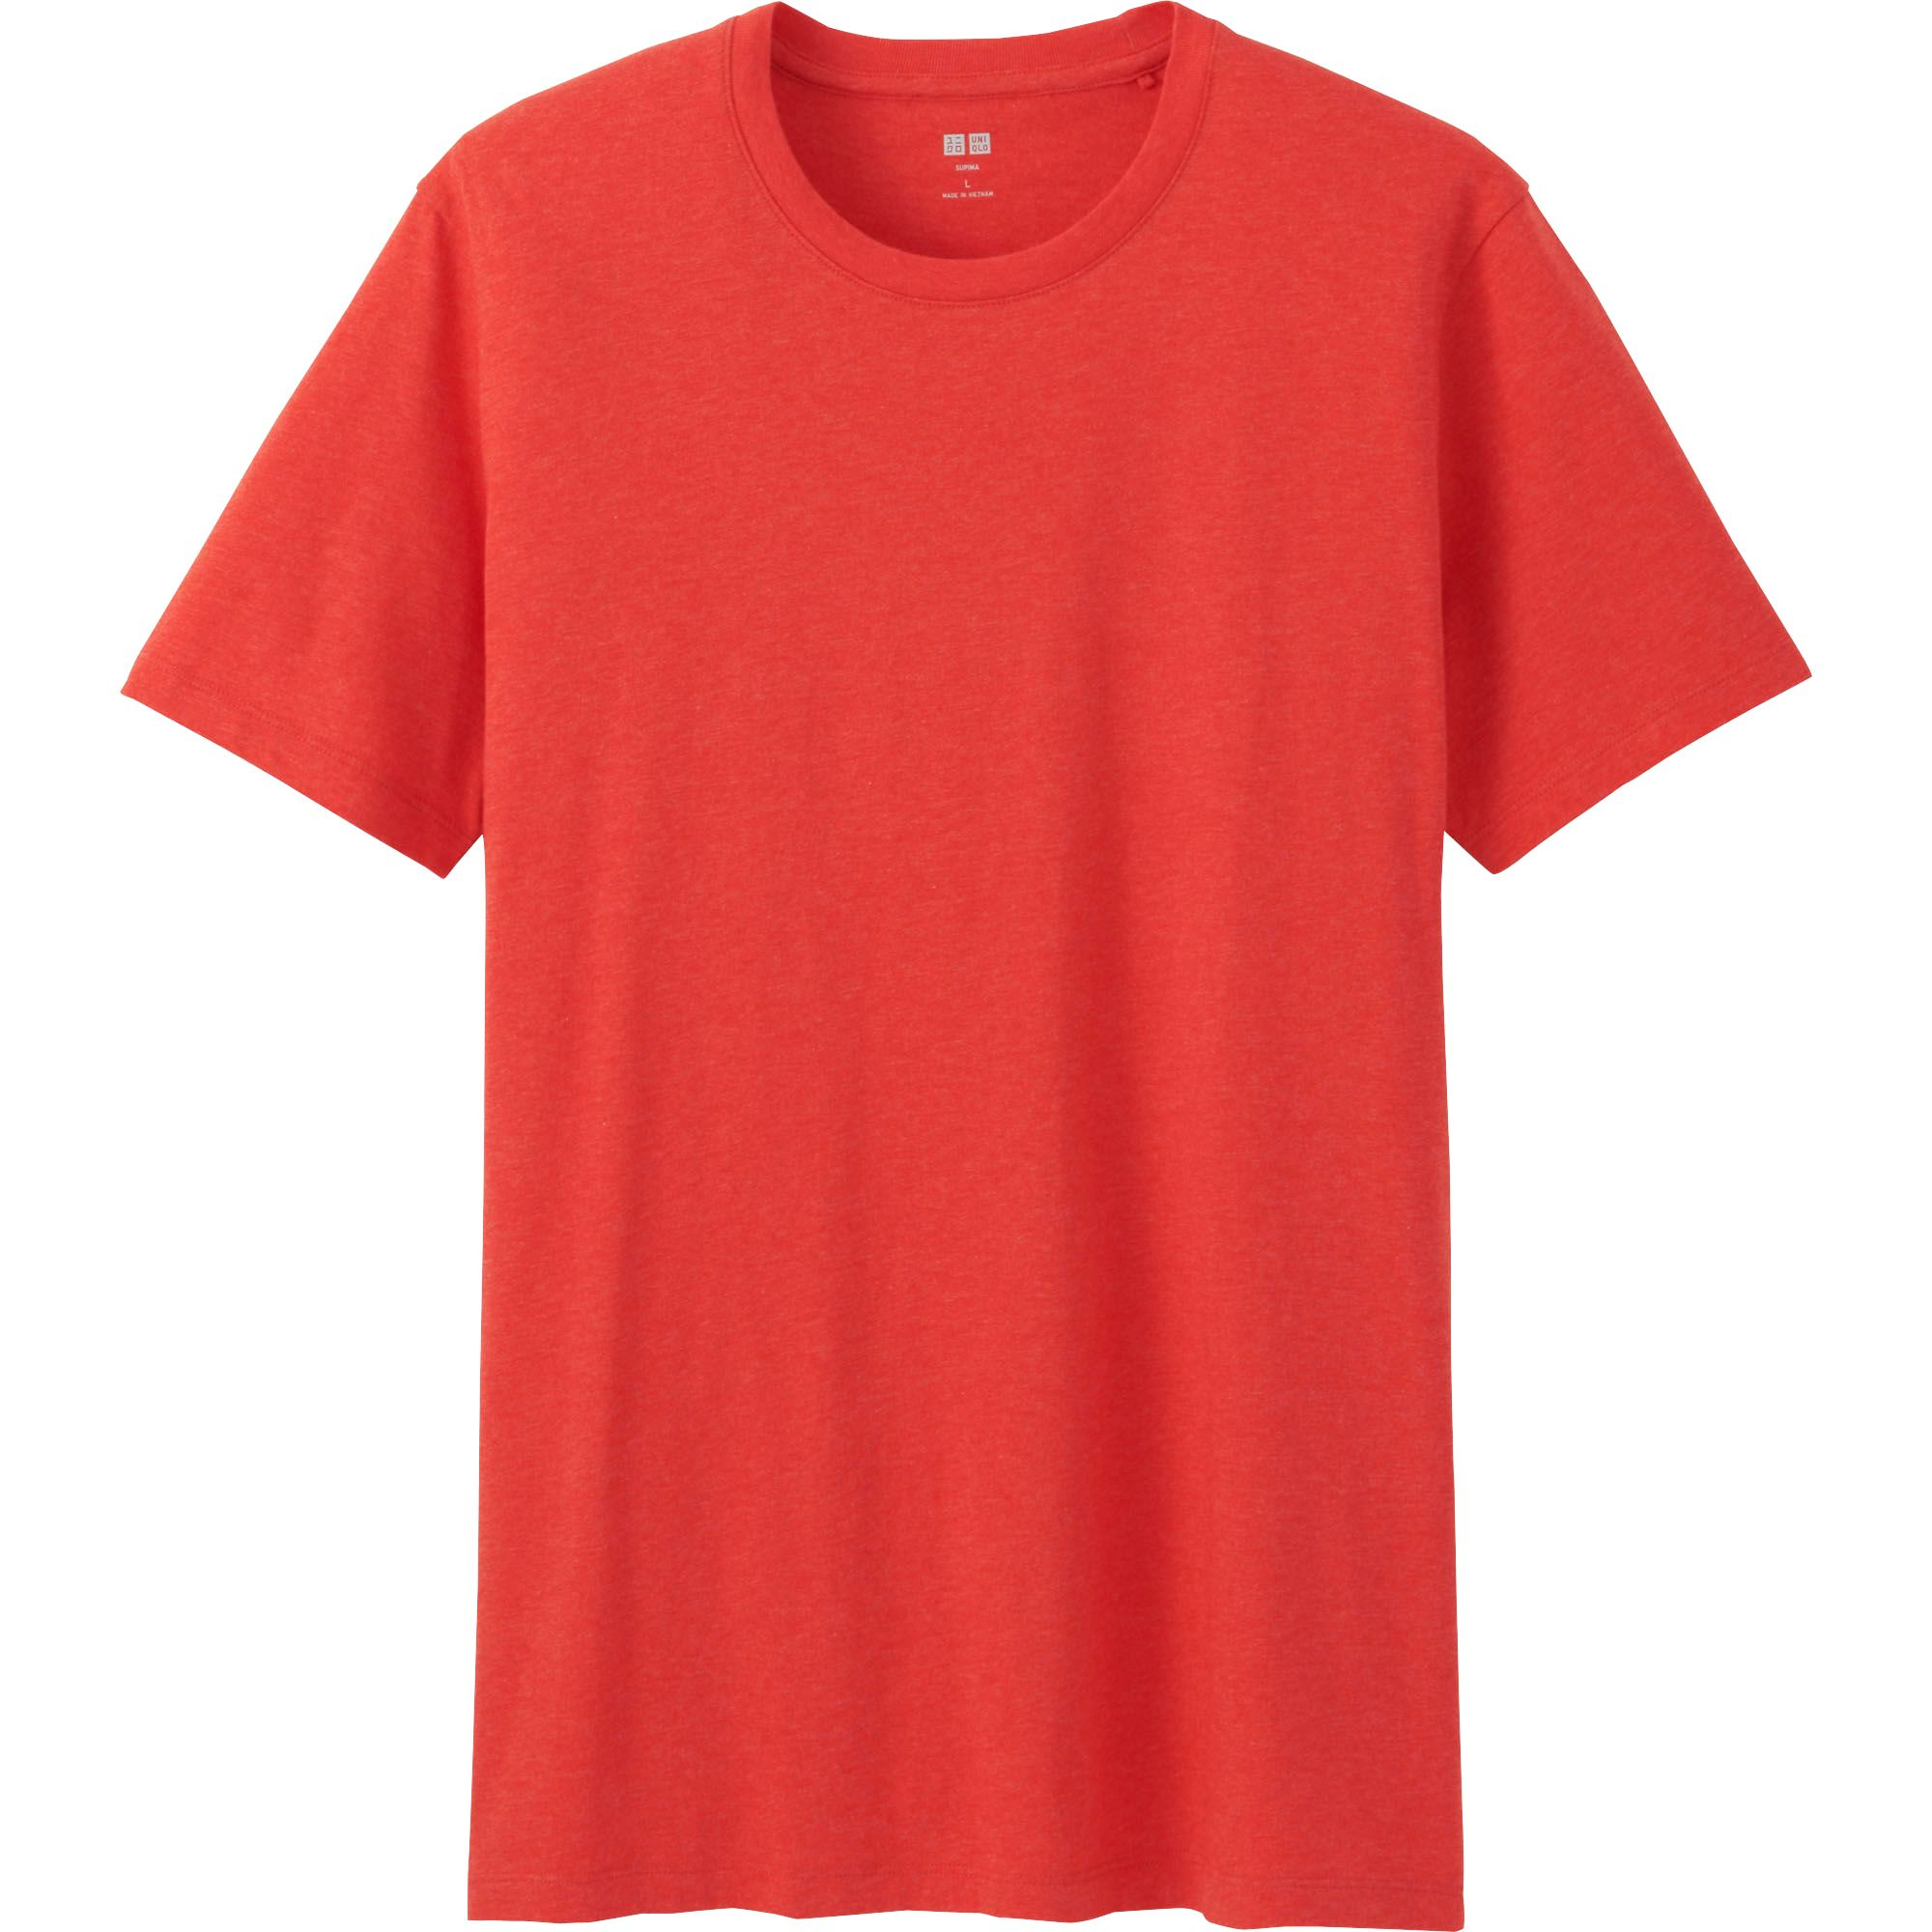 Uniqlo Men Supima Cotton Crew Neck Short Sleeve T-shirt in Red | Lyst